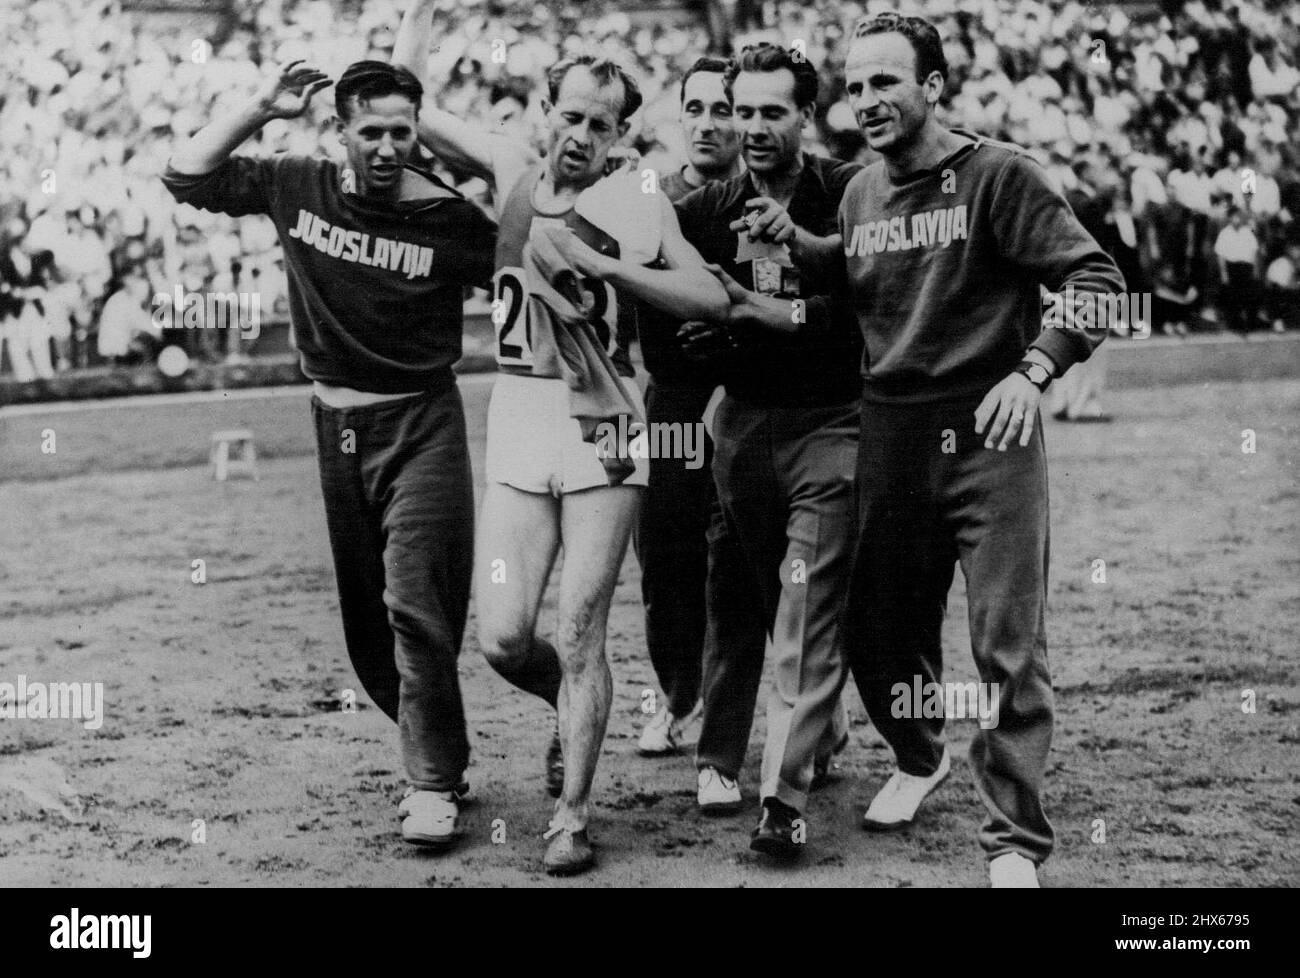 The XIVth Olympiad - Czech Wins The 10,000 Metres -- E. Zatopek (Czechoslovakia) after he had won the 10,000 metres at Wembley Stadium, being assisted off the track by members of the Yugoslav team. October 8, 1948. (Photo by Sport & General Press Agency, Limited). Stock Photo